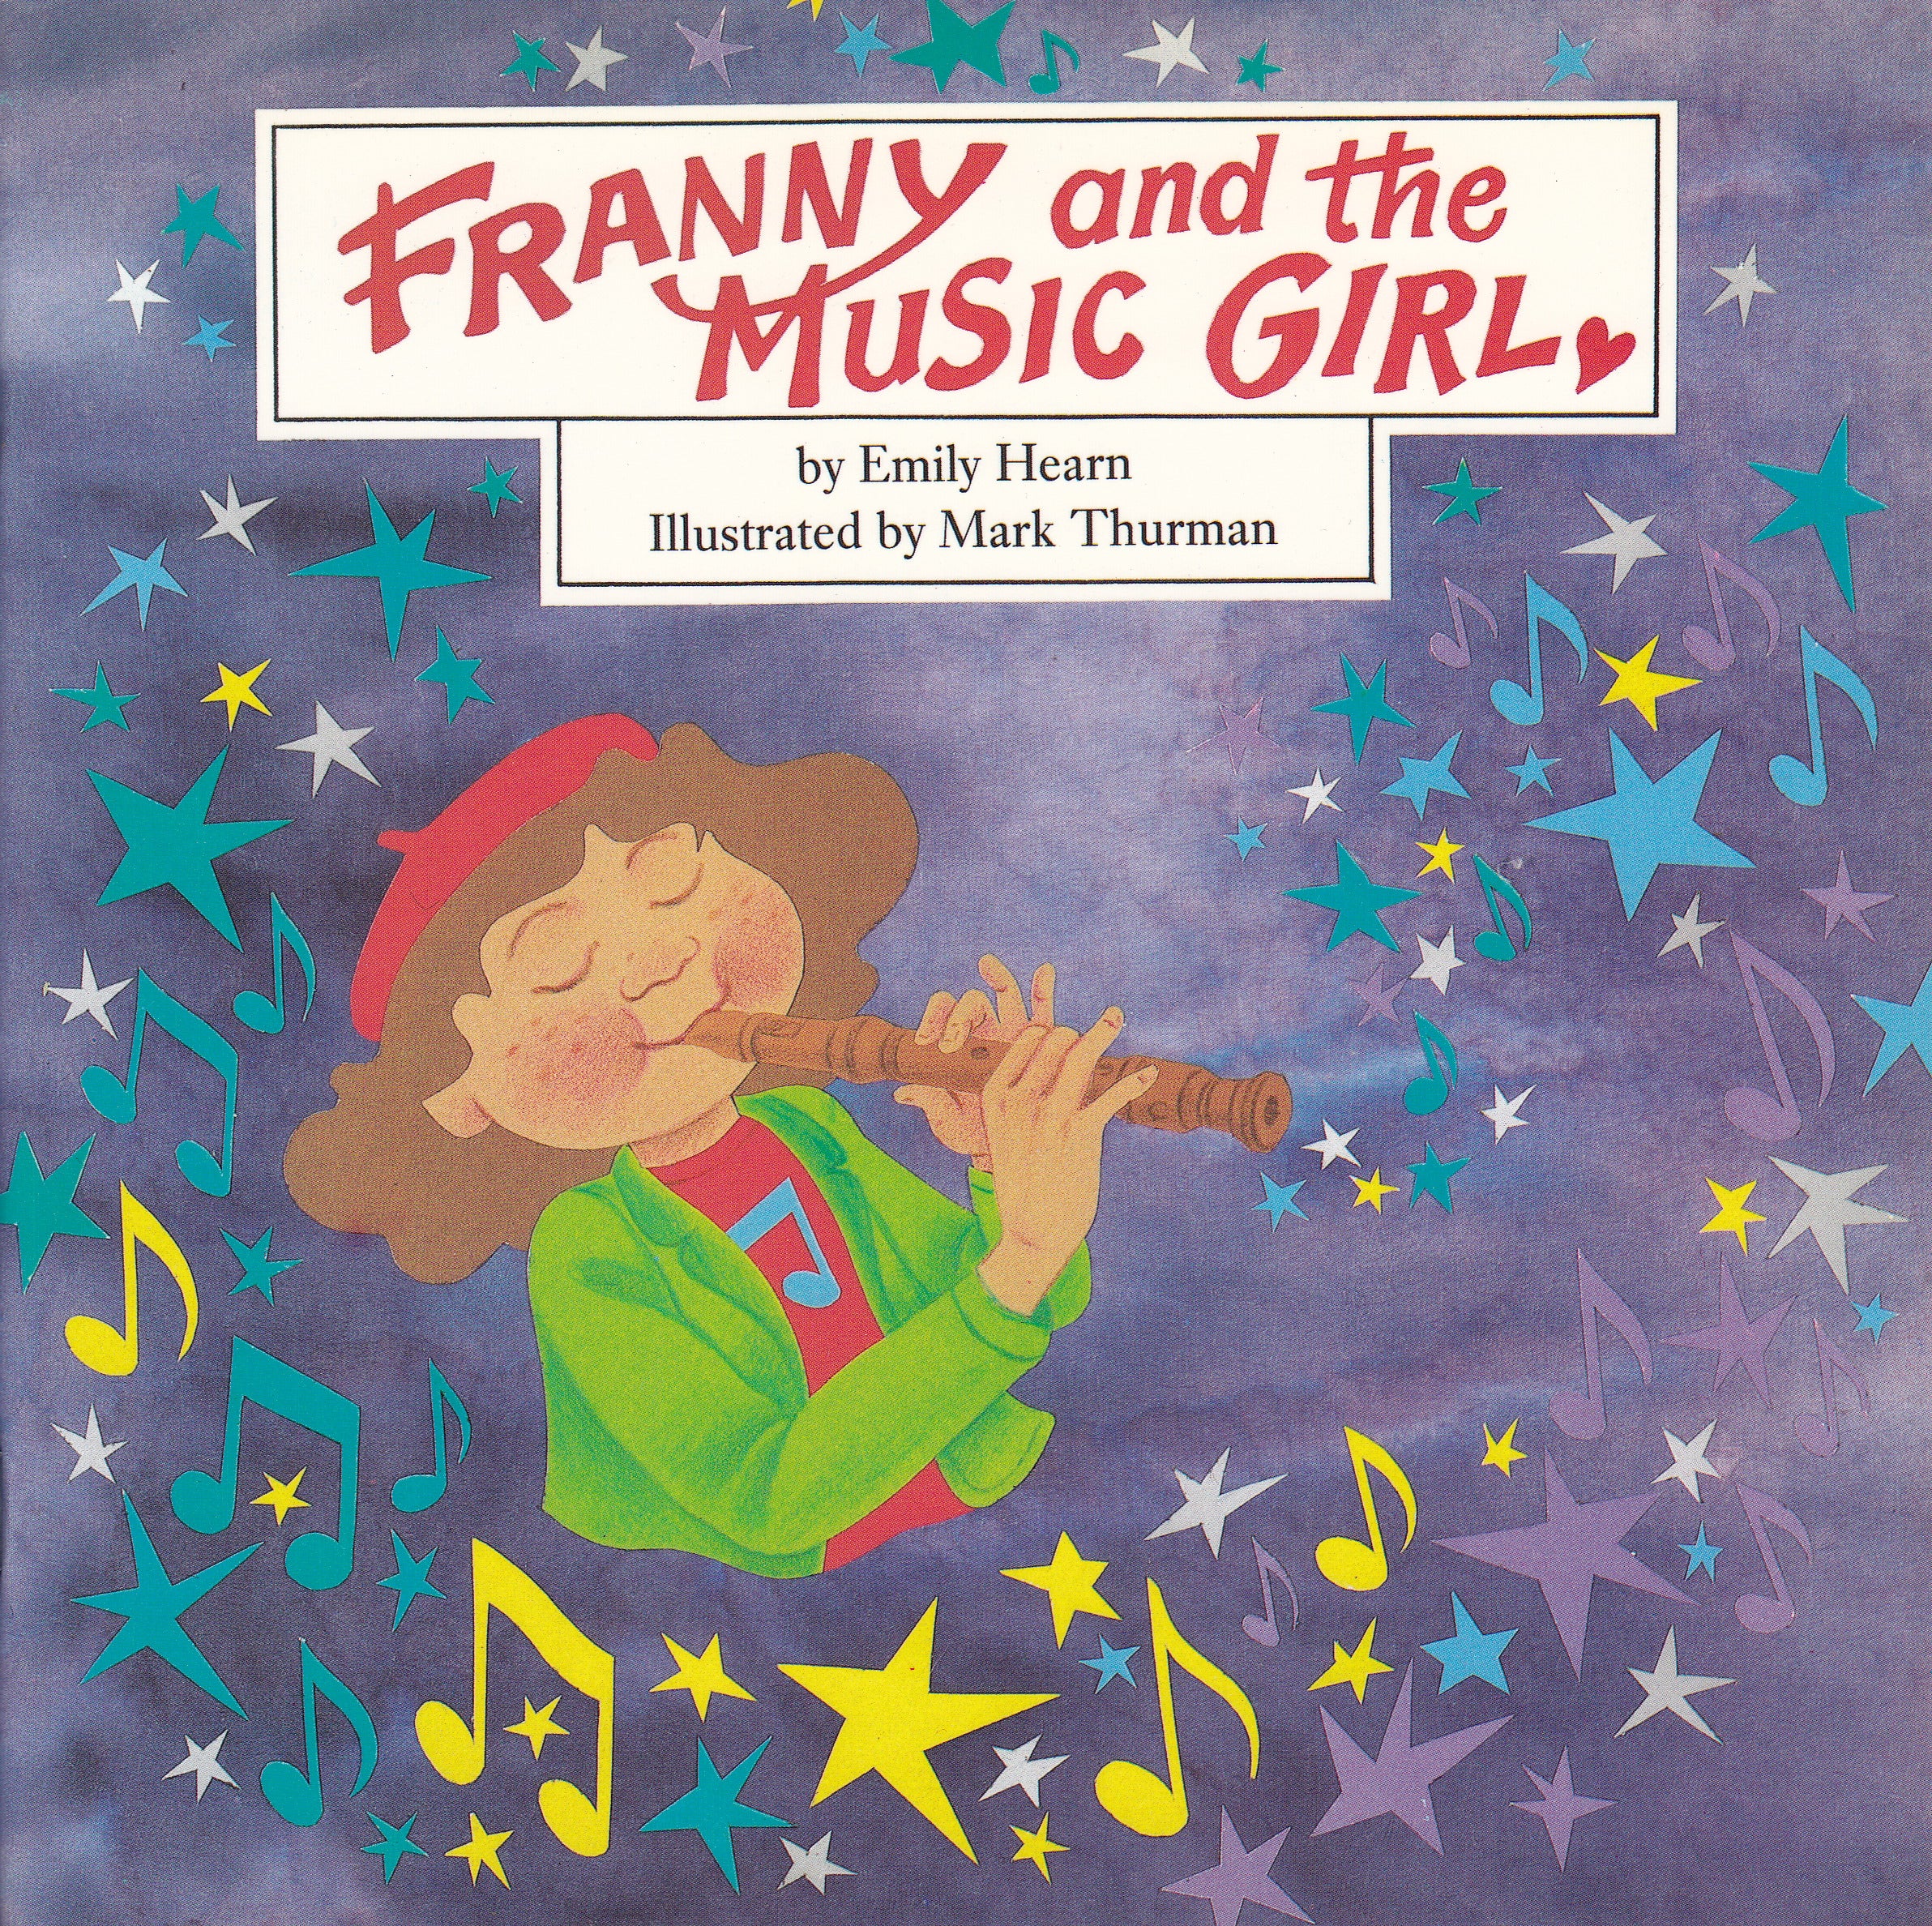 Franny and the Music Girl